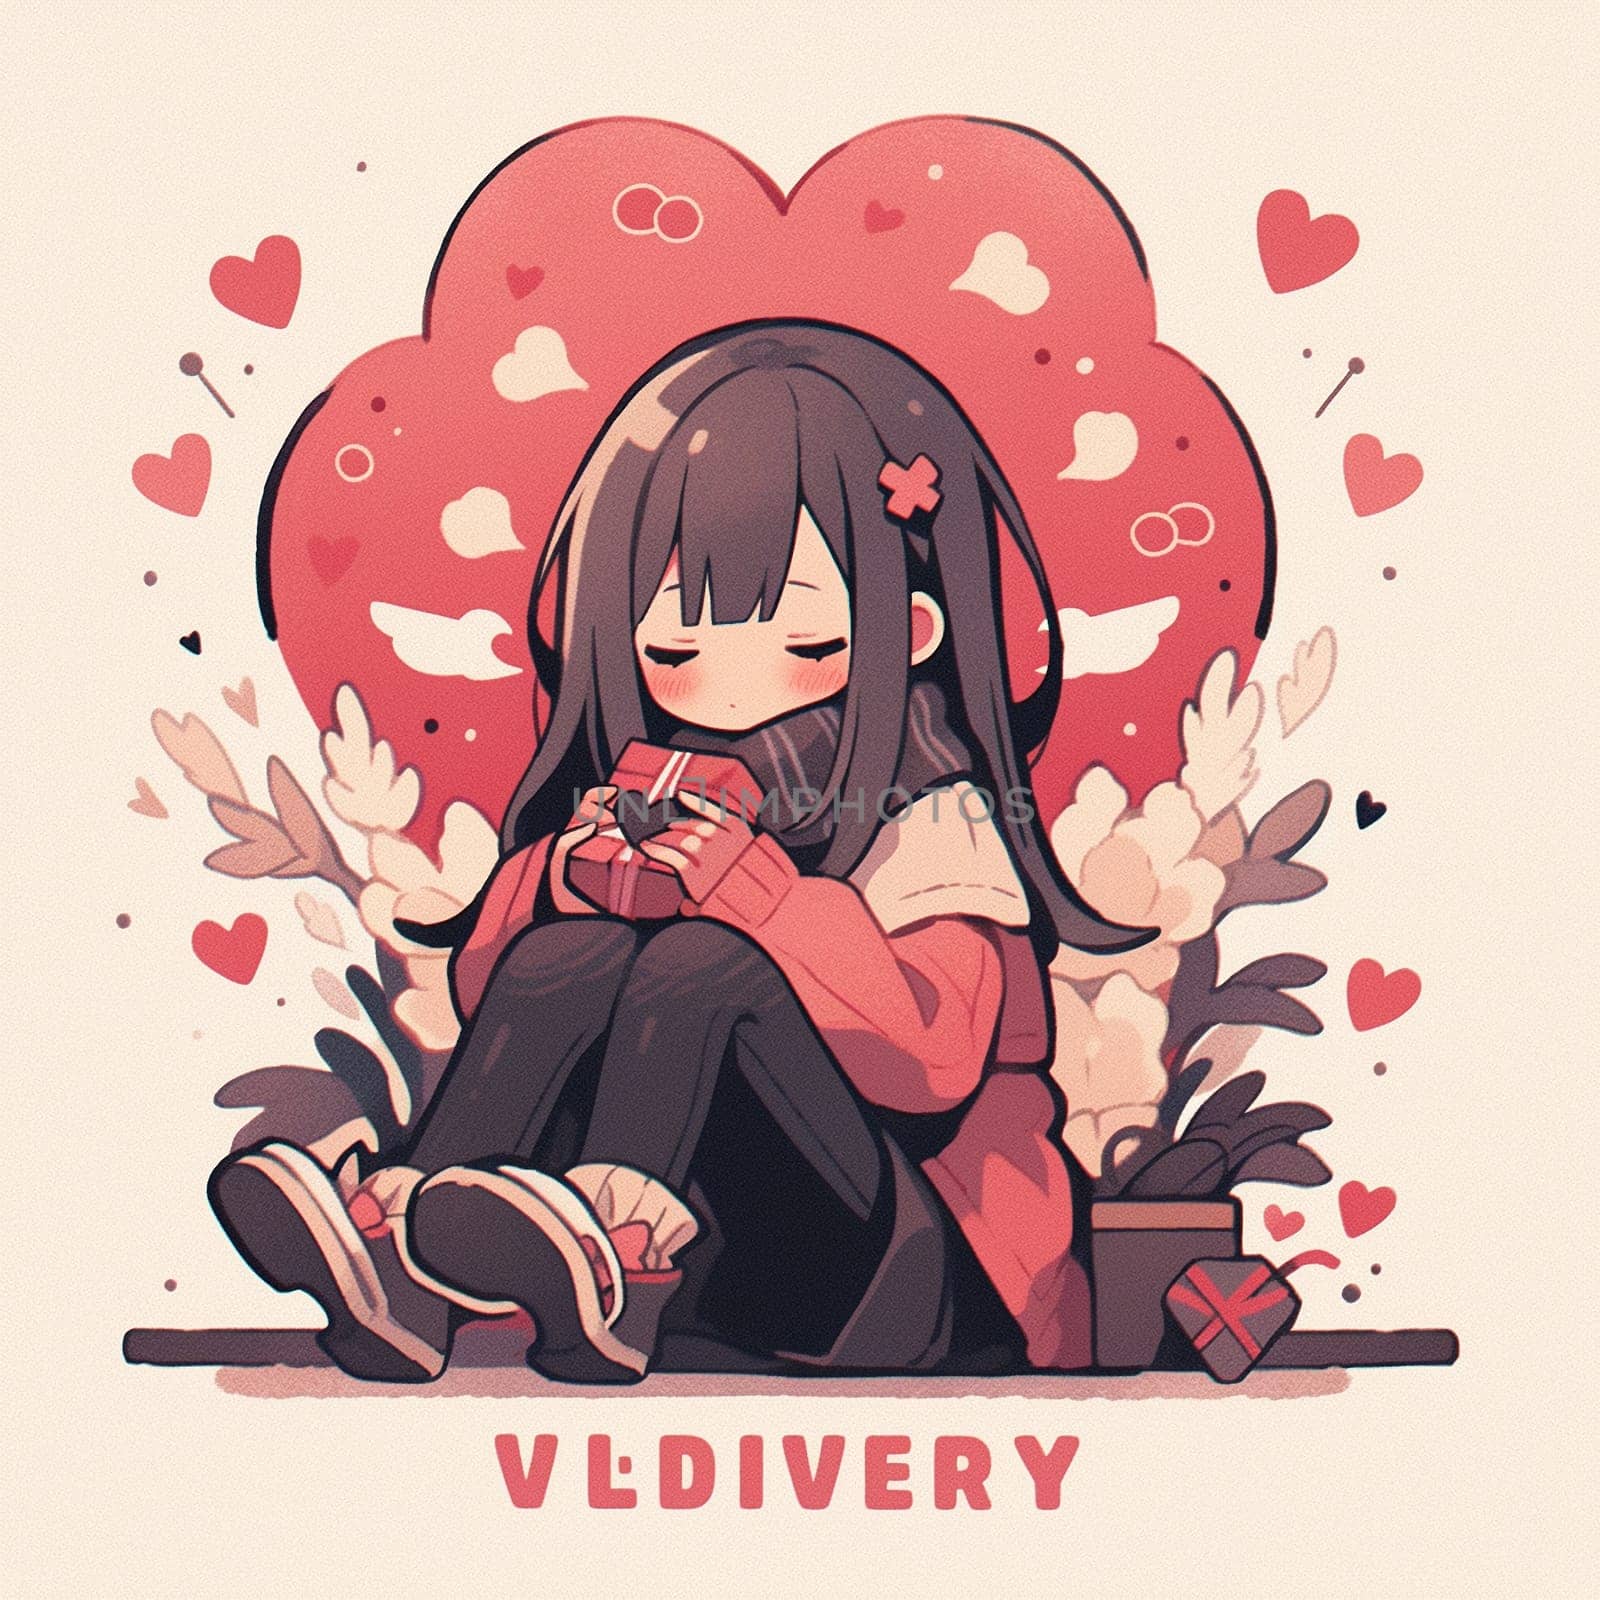 A beautiful girl full of love in the Anime style. A beautiful drawing for Valentine's Day by NeuroSky